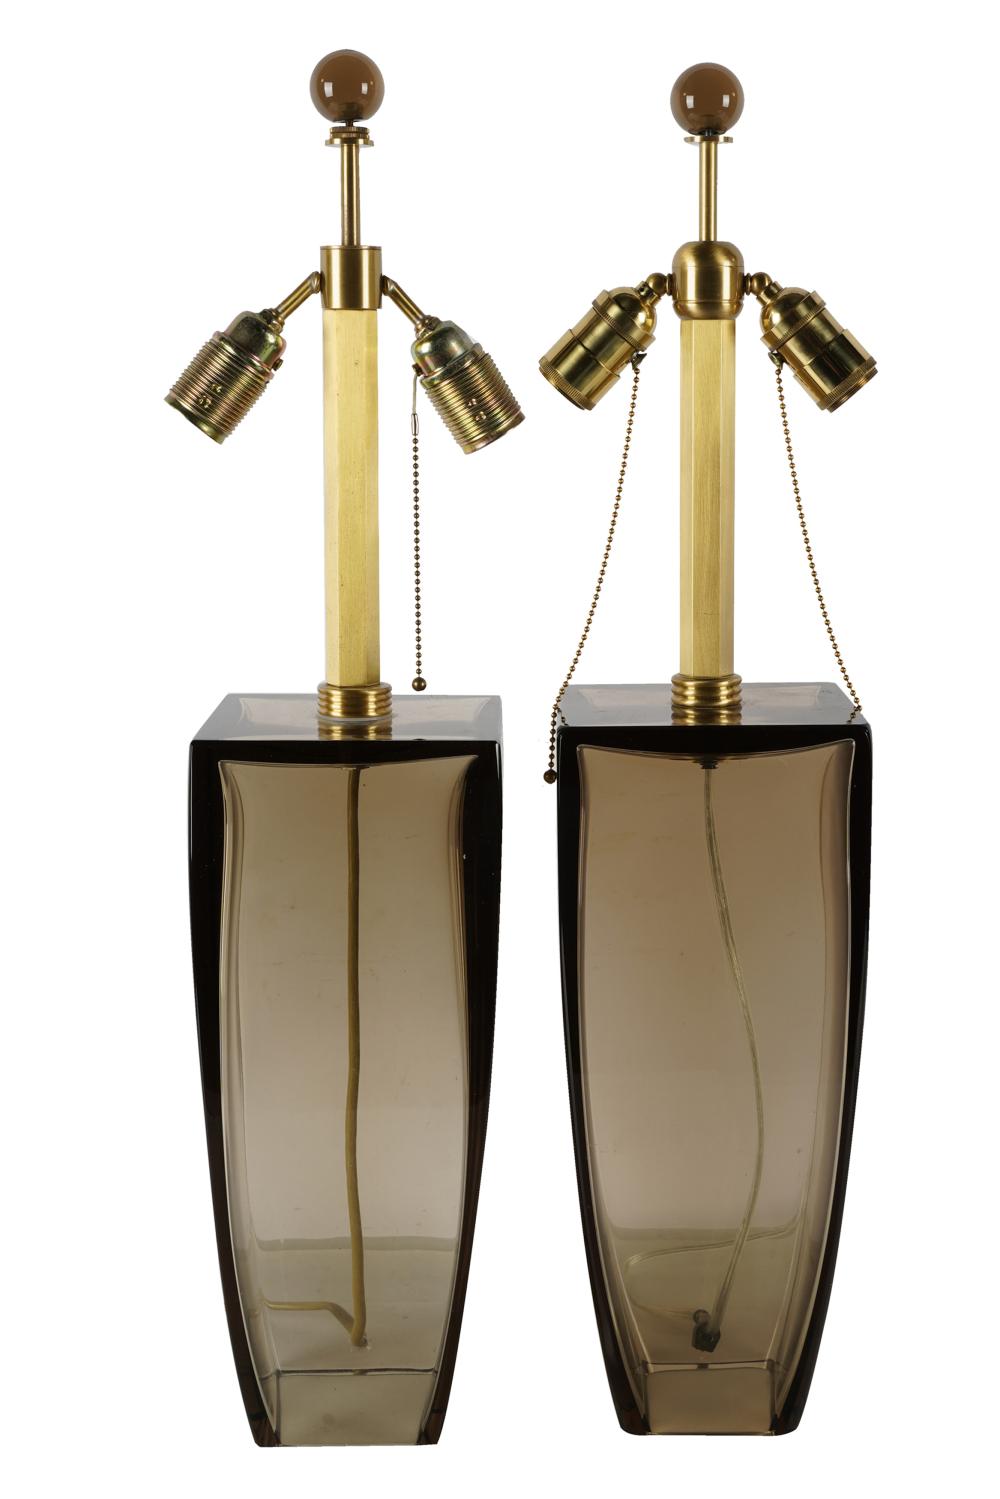 PAIR OF SMOKED GLASS TABLE LAMPSof